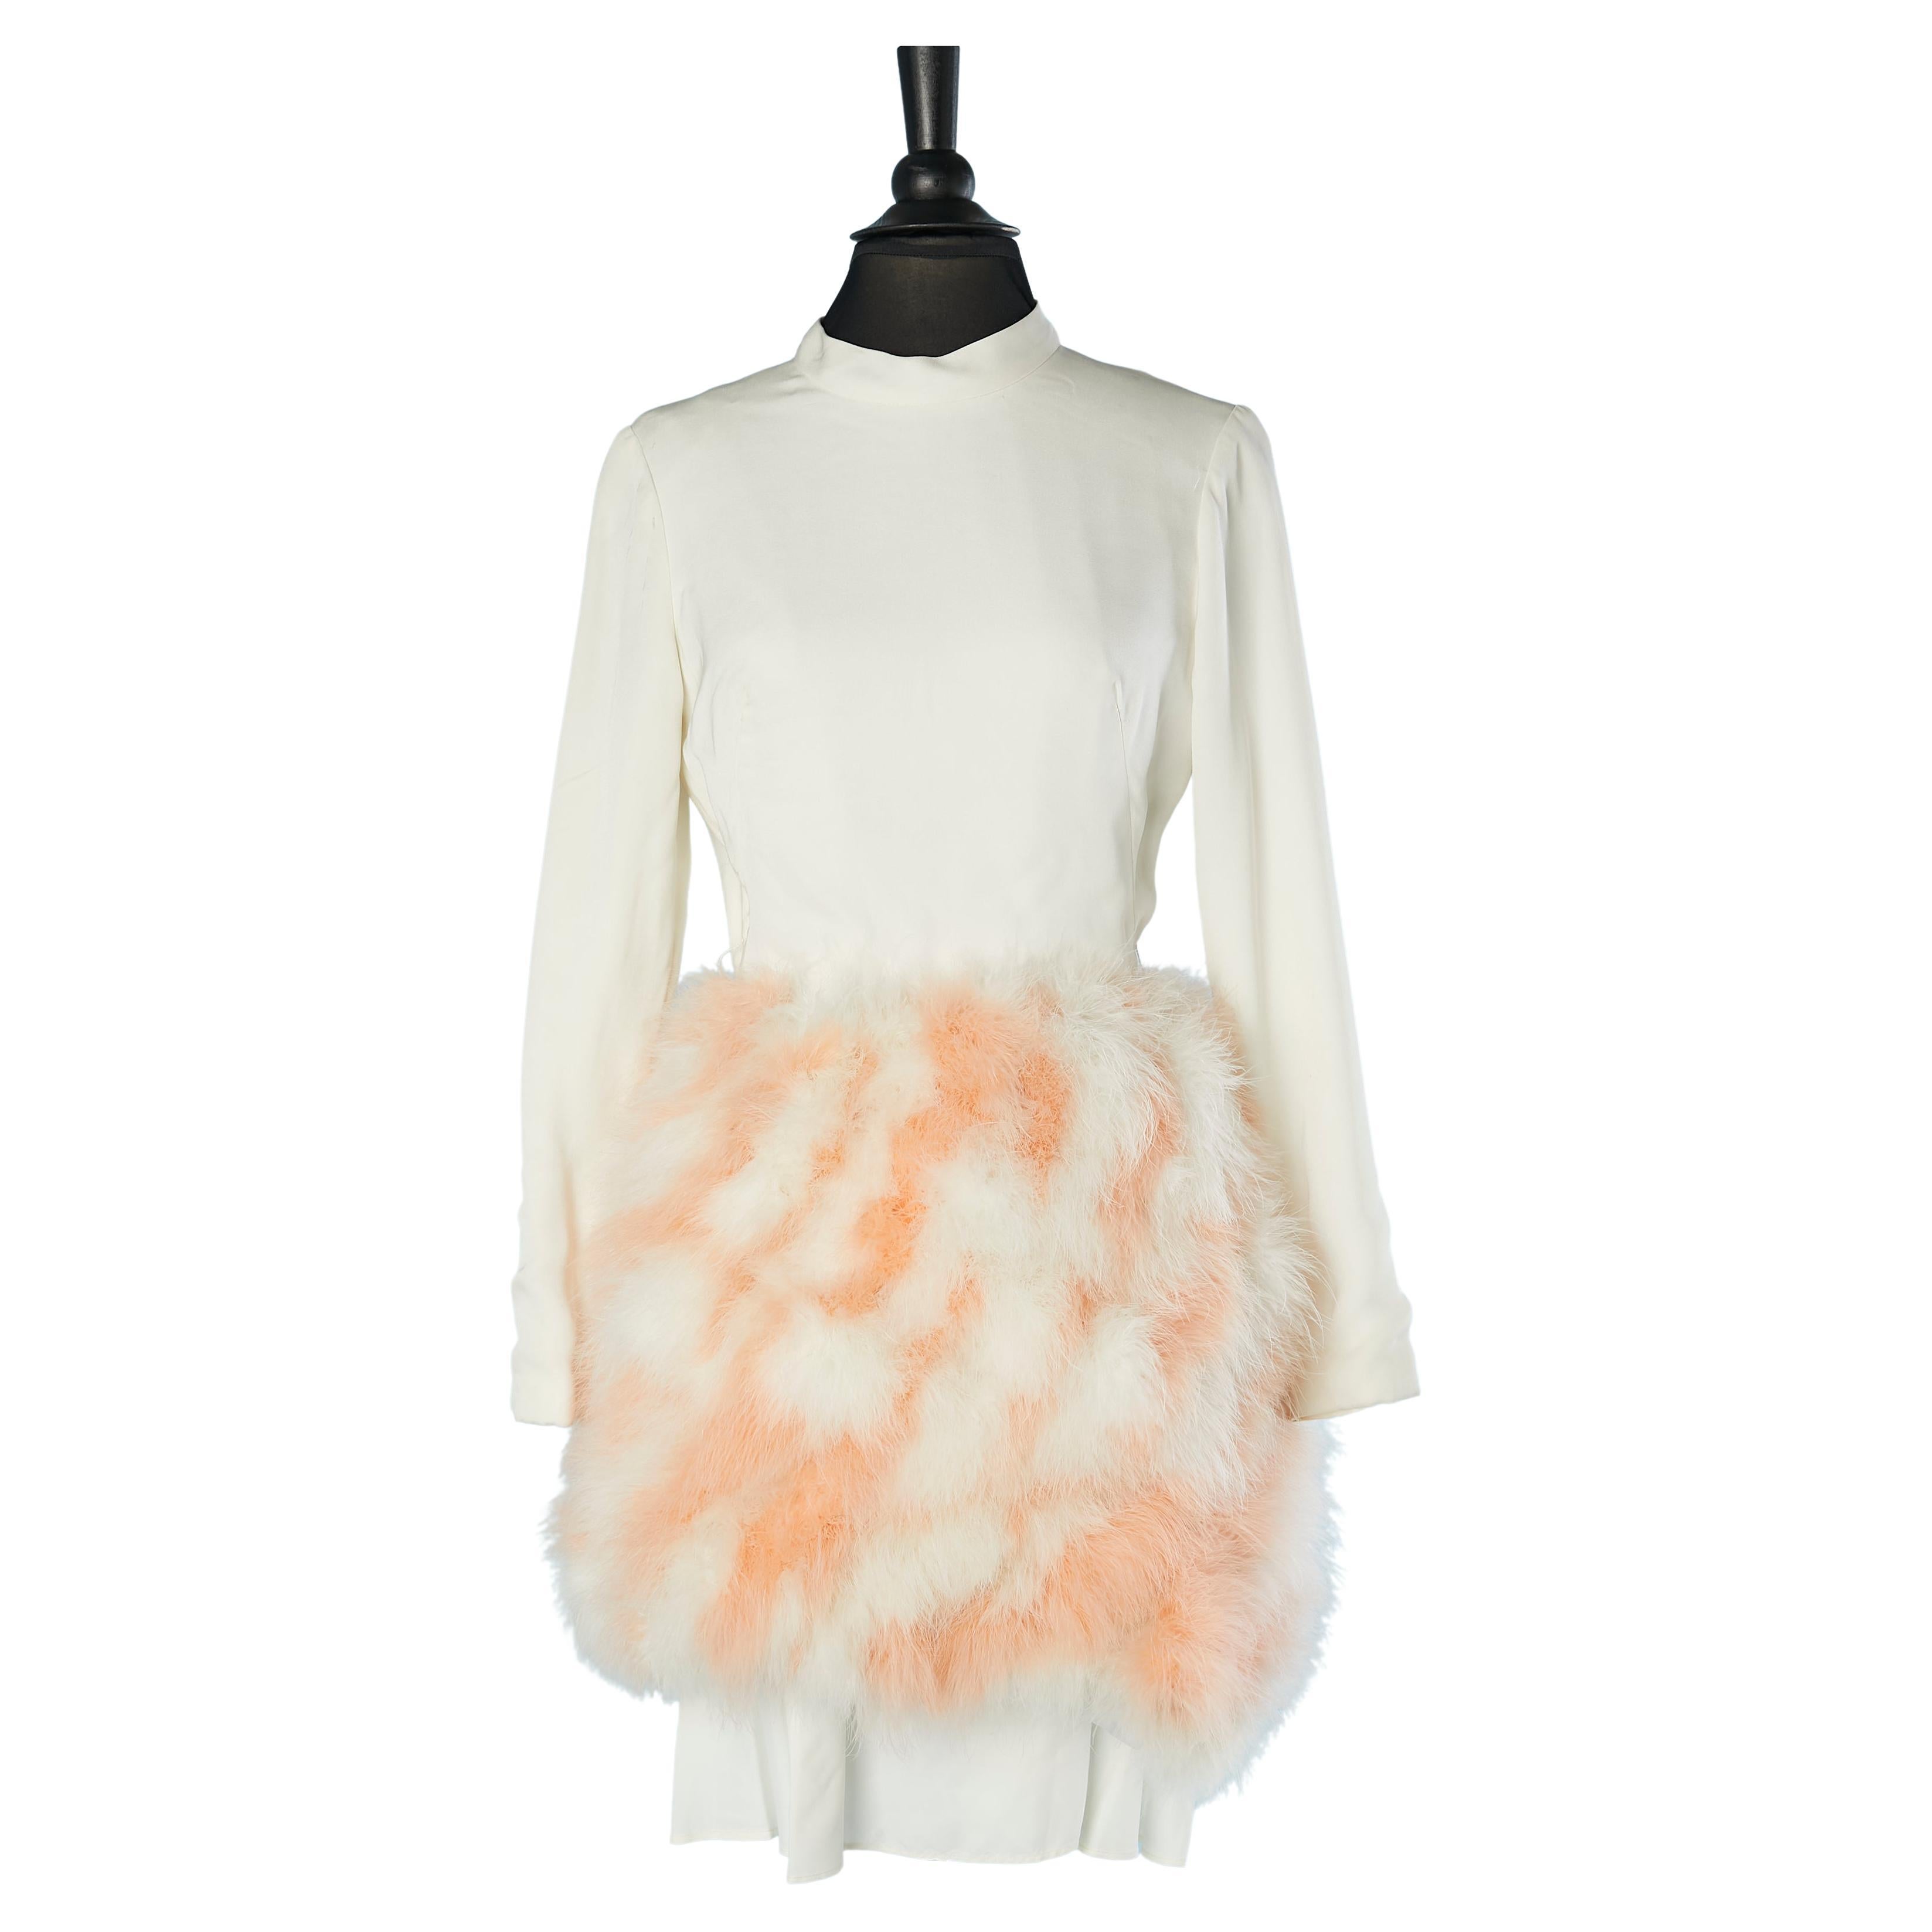 Cocktail dress in off-white rayon and feathers Lord & Taylor 5th Avenue  For Sale